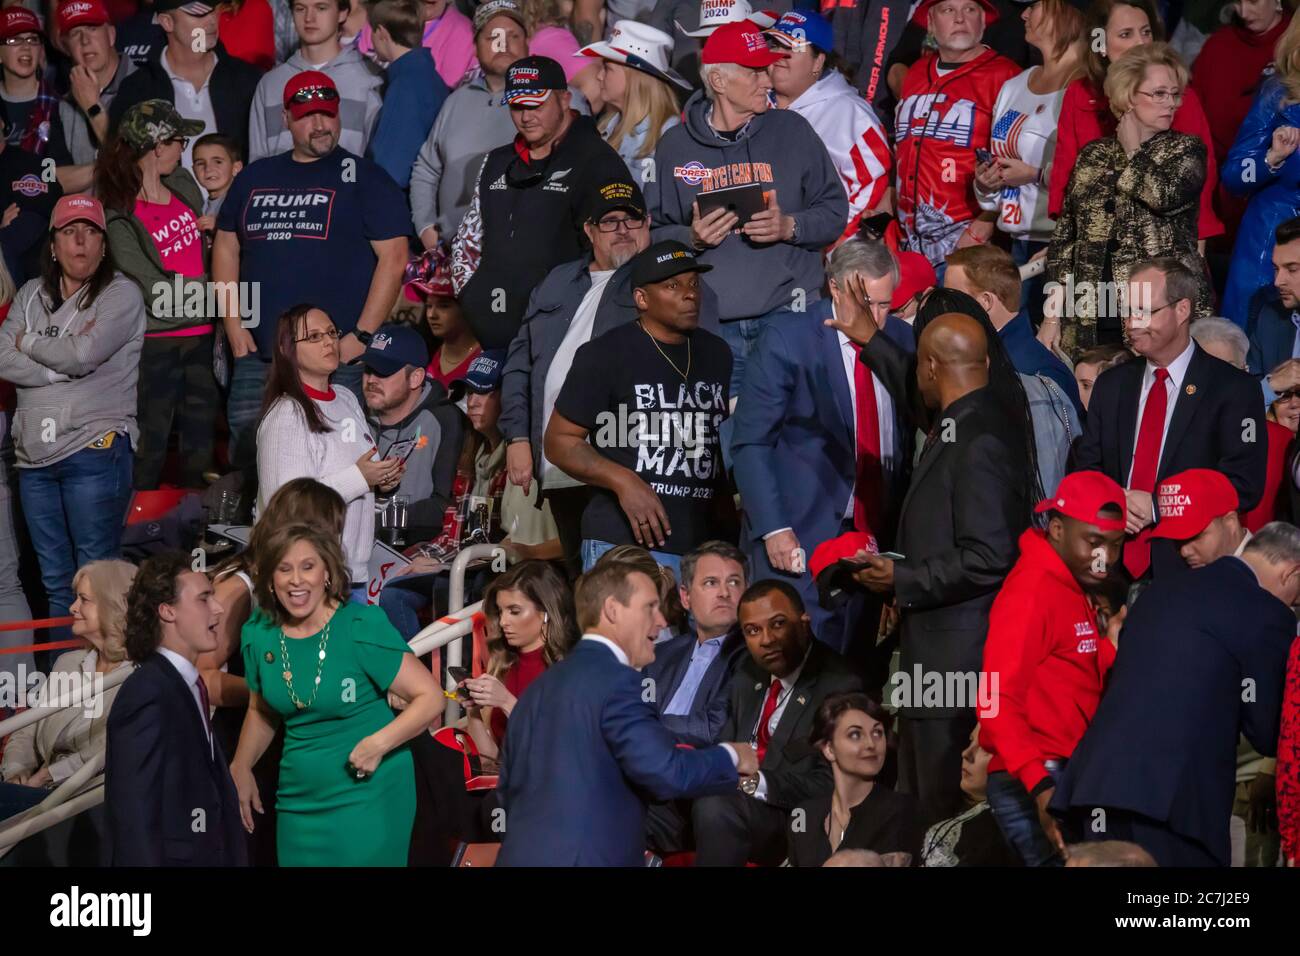 President Trump supporter wearing a Black Lives MAGA shirt at the campaign rally in the Bojangle's Coliseum in Charlotte, North Carolina Stock Photo